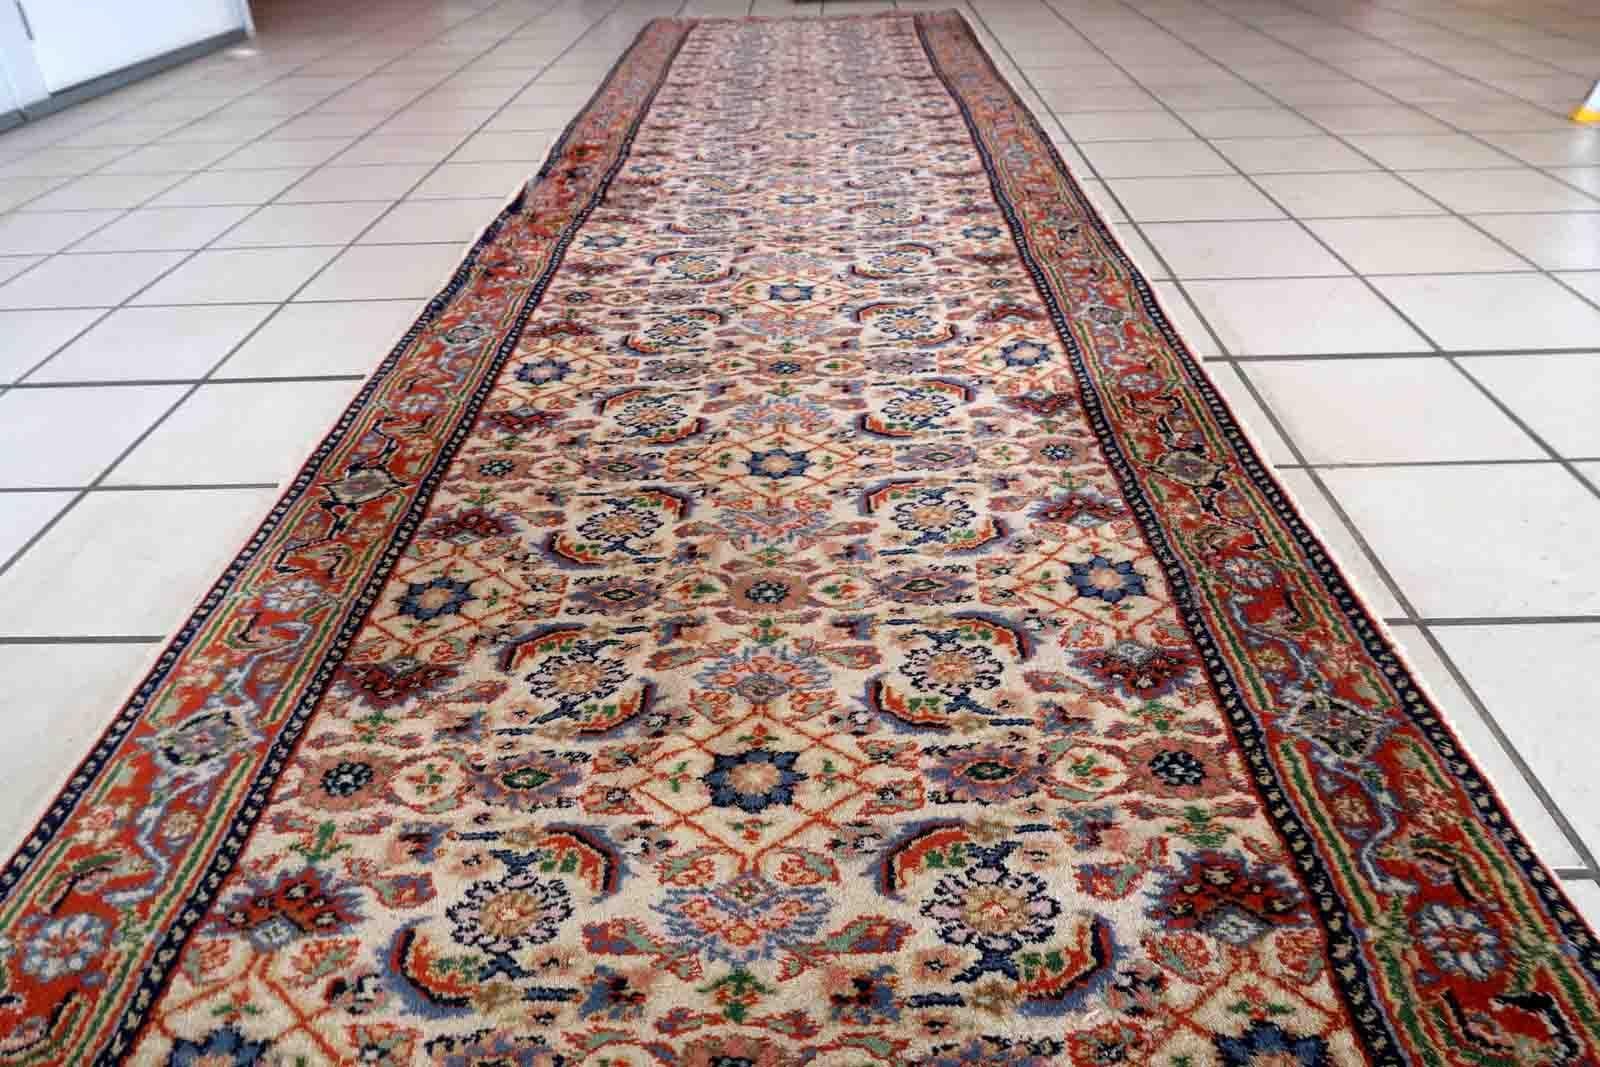 Handmade vintage Persian Mahal runner in all-over design. The runner is from the end of 20th century in good condition, it has some old restoration on one part of the border.

-condition: good, some restorations,

-circa: 1960s,

-size: 2.5' x